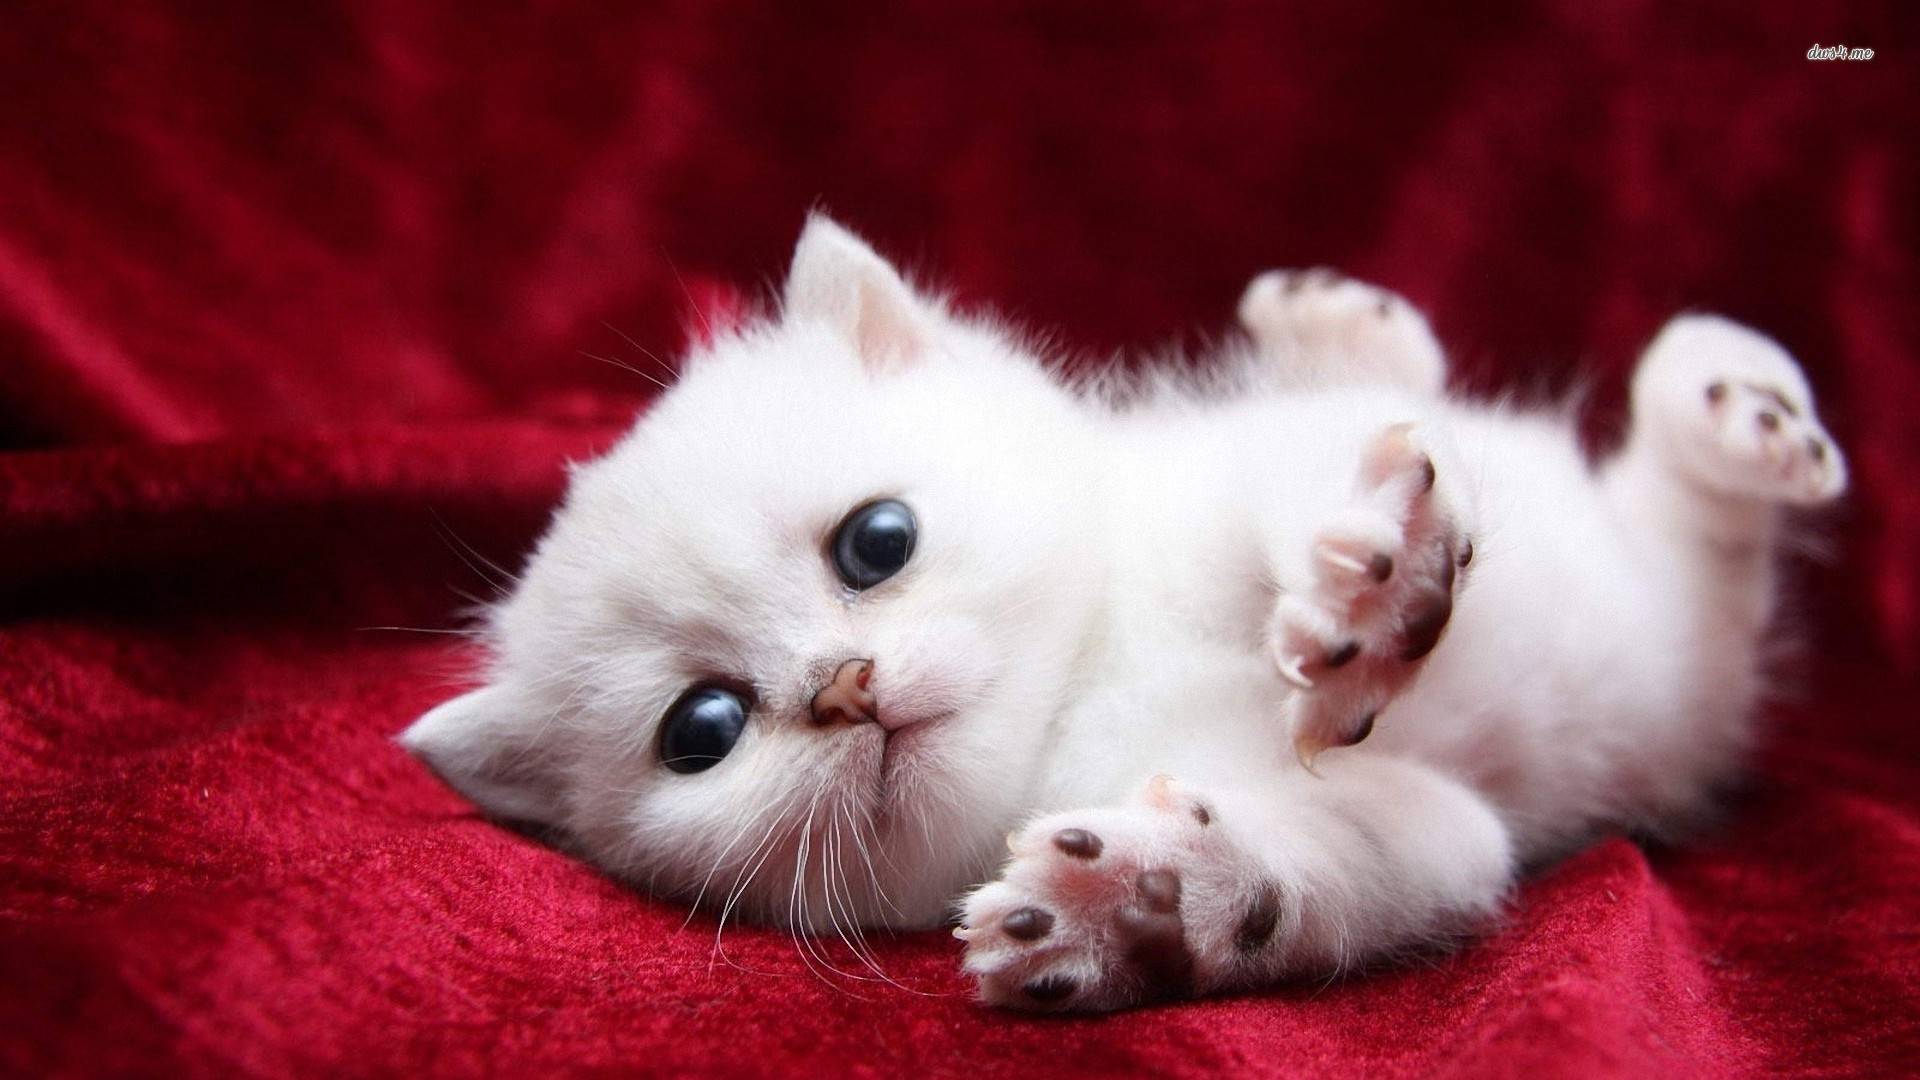 Free download SUPER CUTE WHITE KITTY Cats Wallpaper [1920x1080 ...